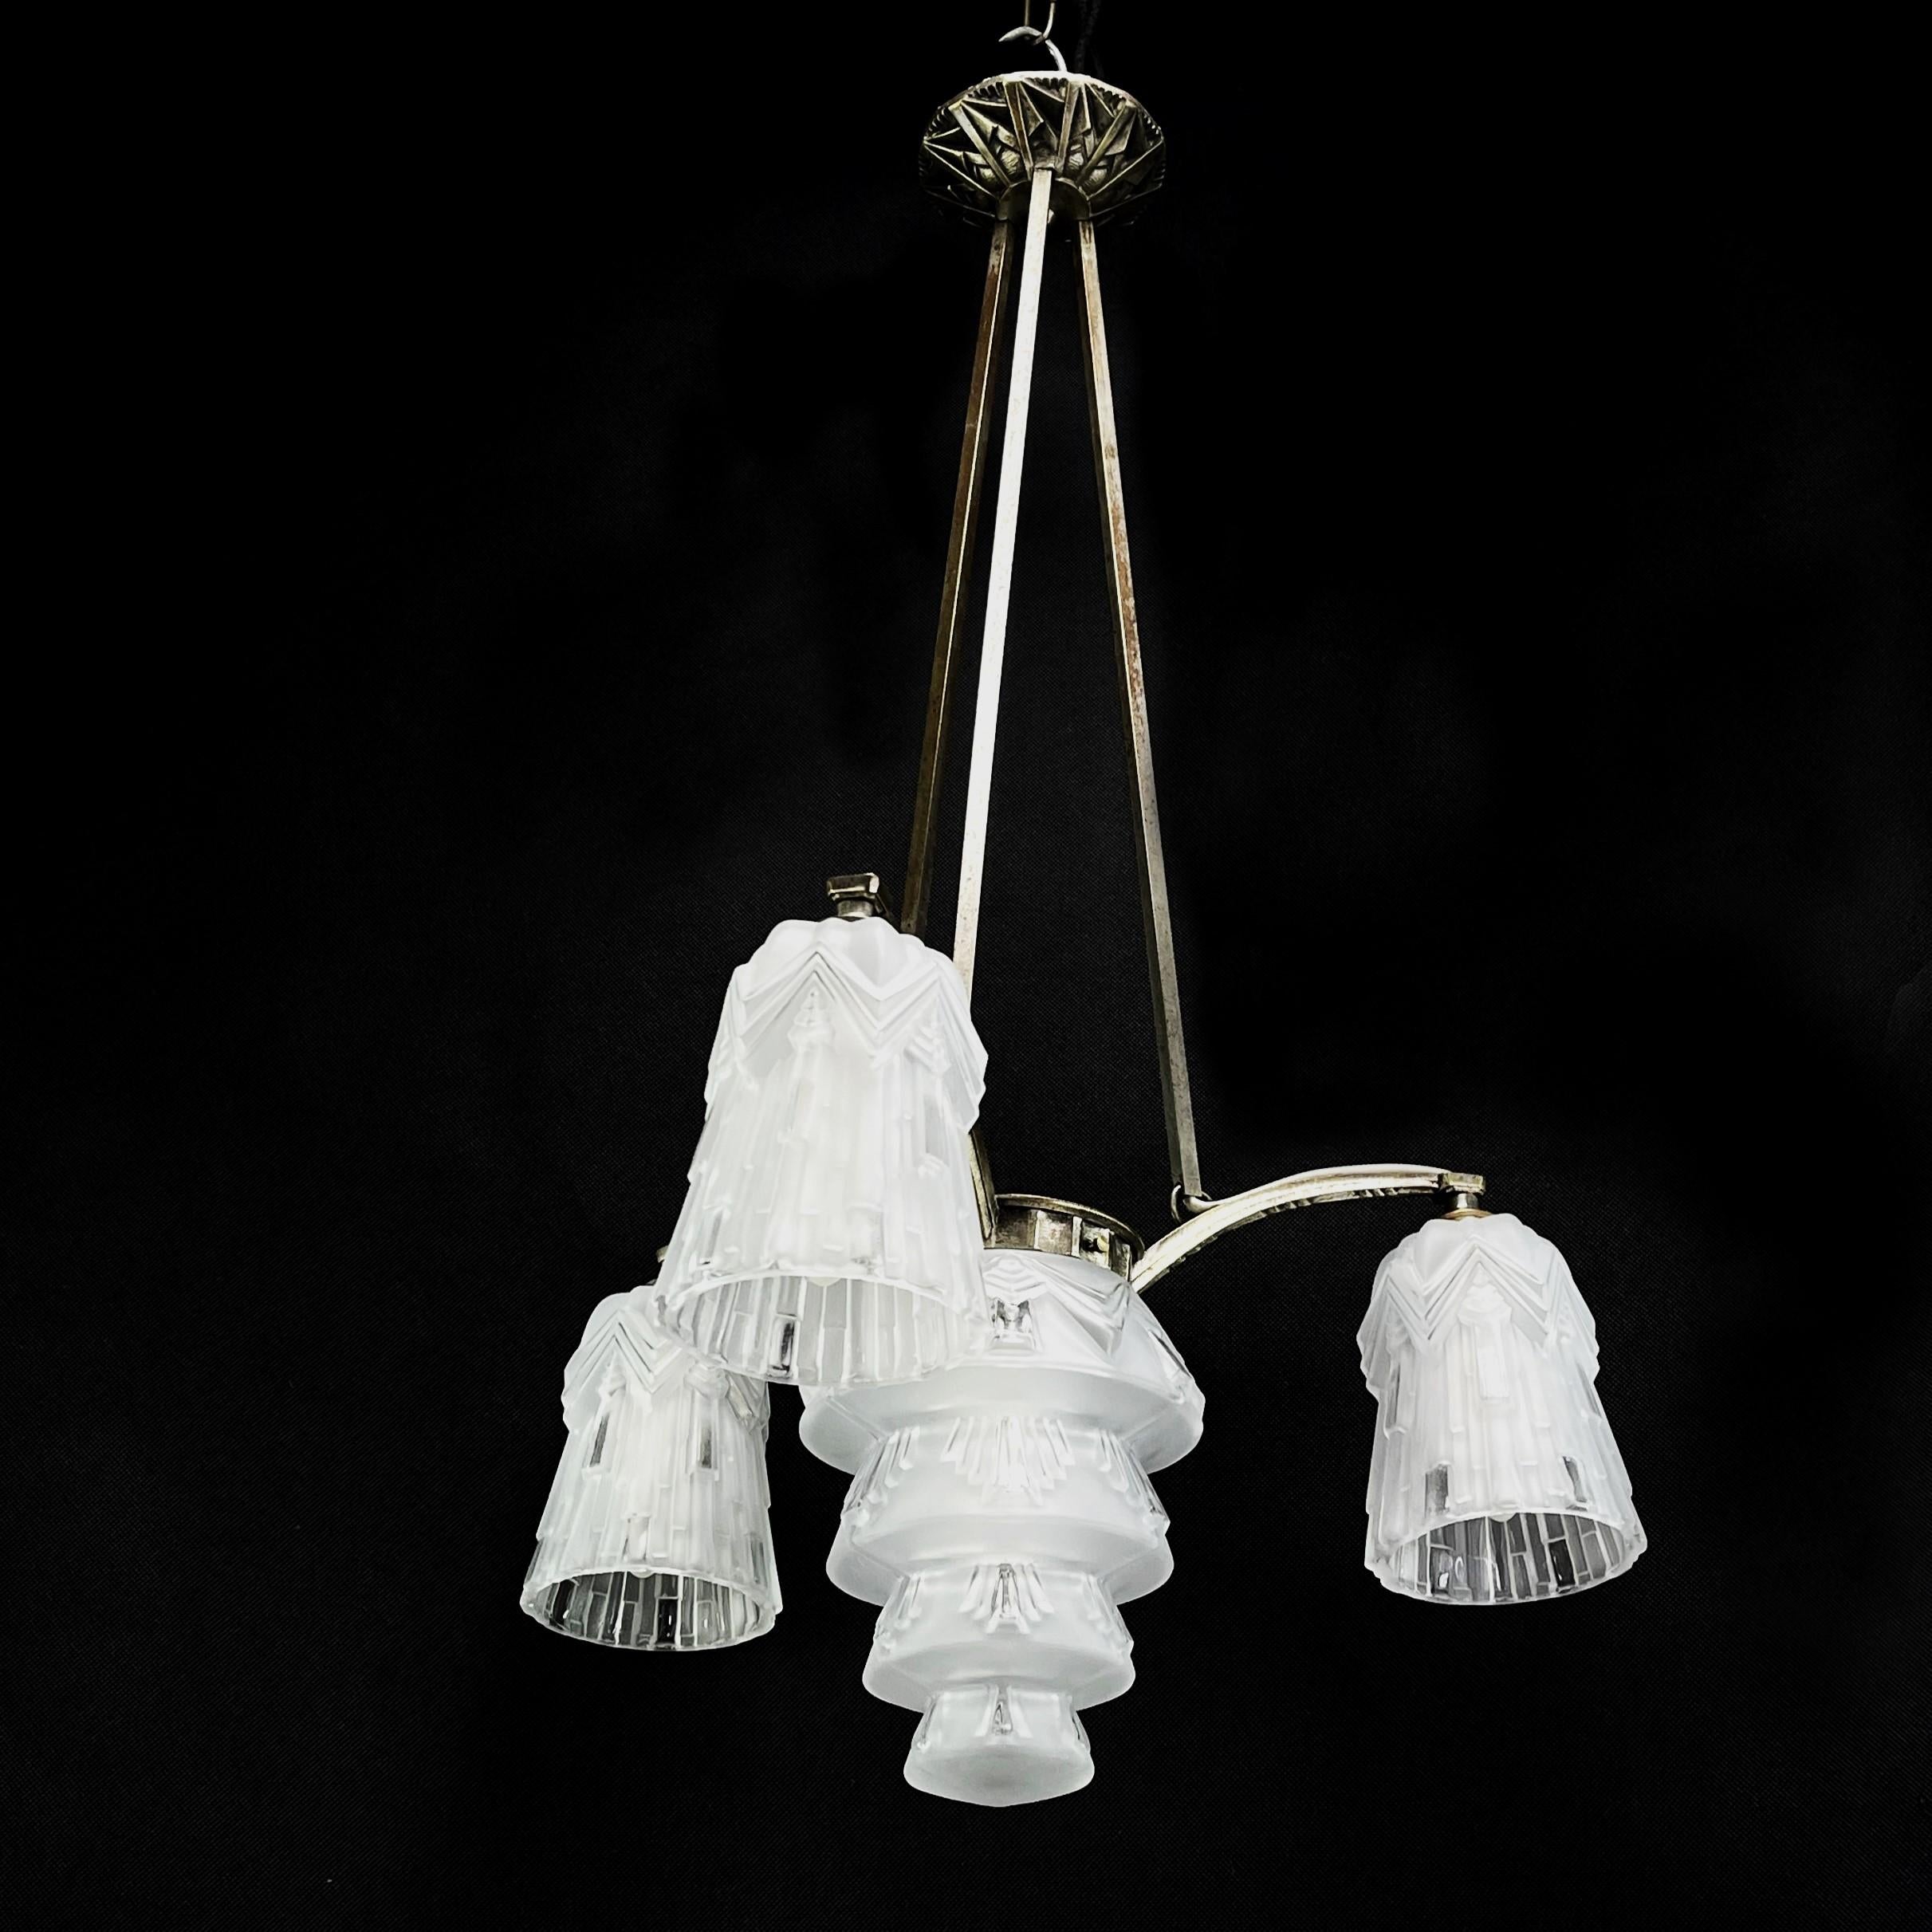 Art Deco Chandelier

The ART DECO ceiling light is a remarkable example of the craftsmanship and style of the early 20th century. 

This ceiling light cleverly combines metal and glass and harmoniously combines functionality and aesthetics.

The